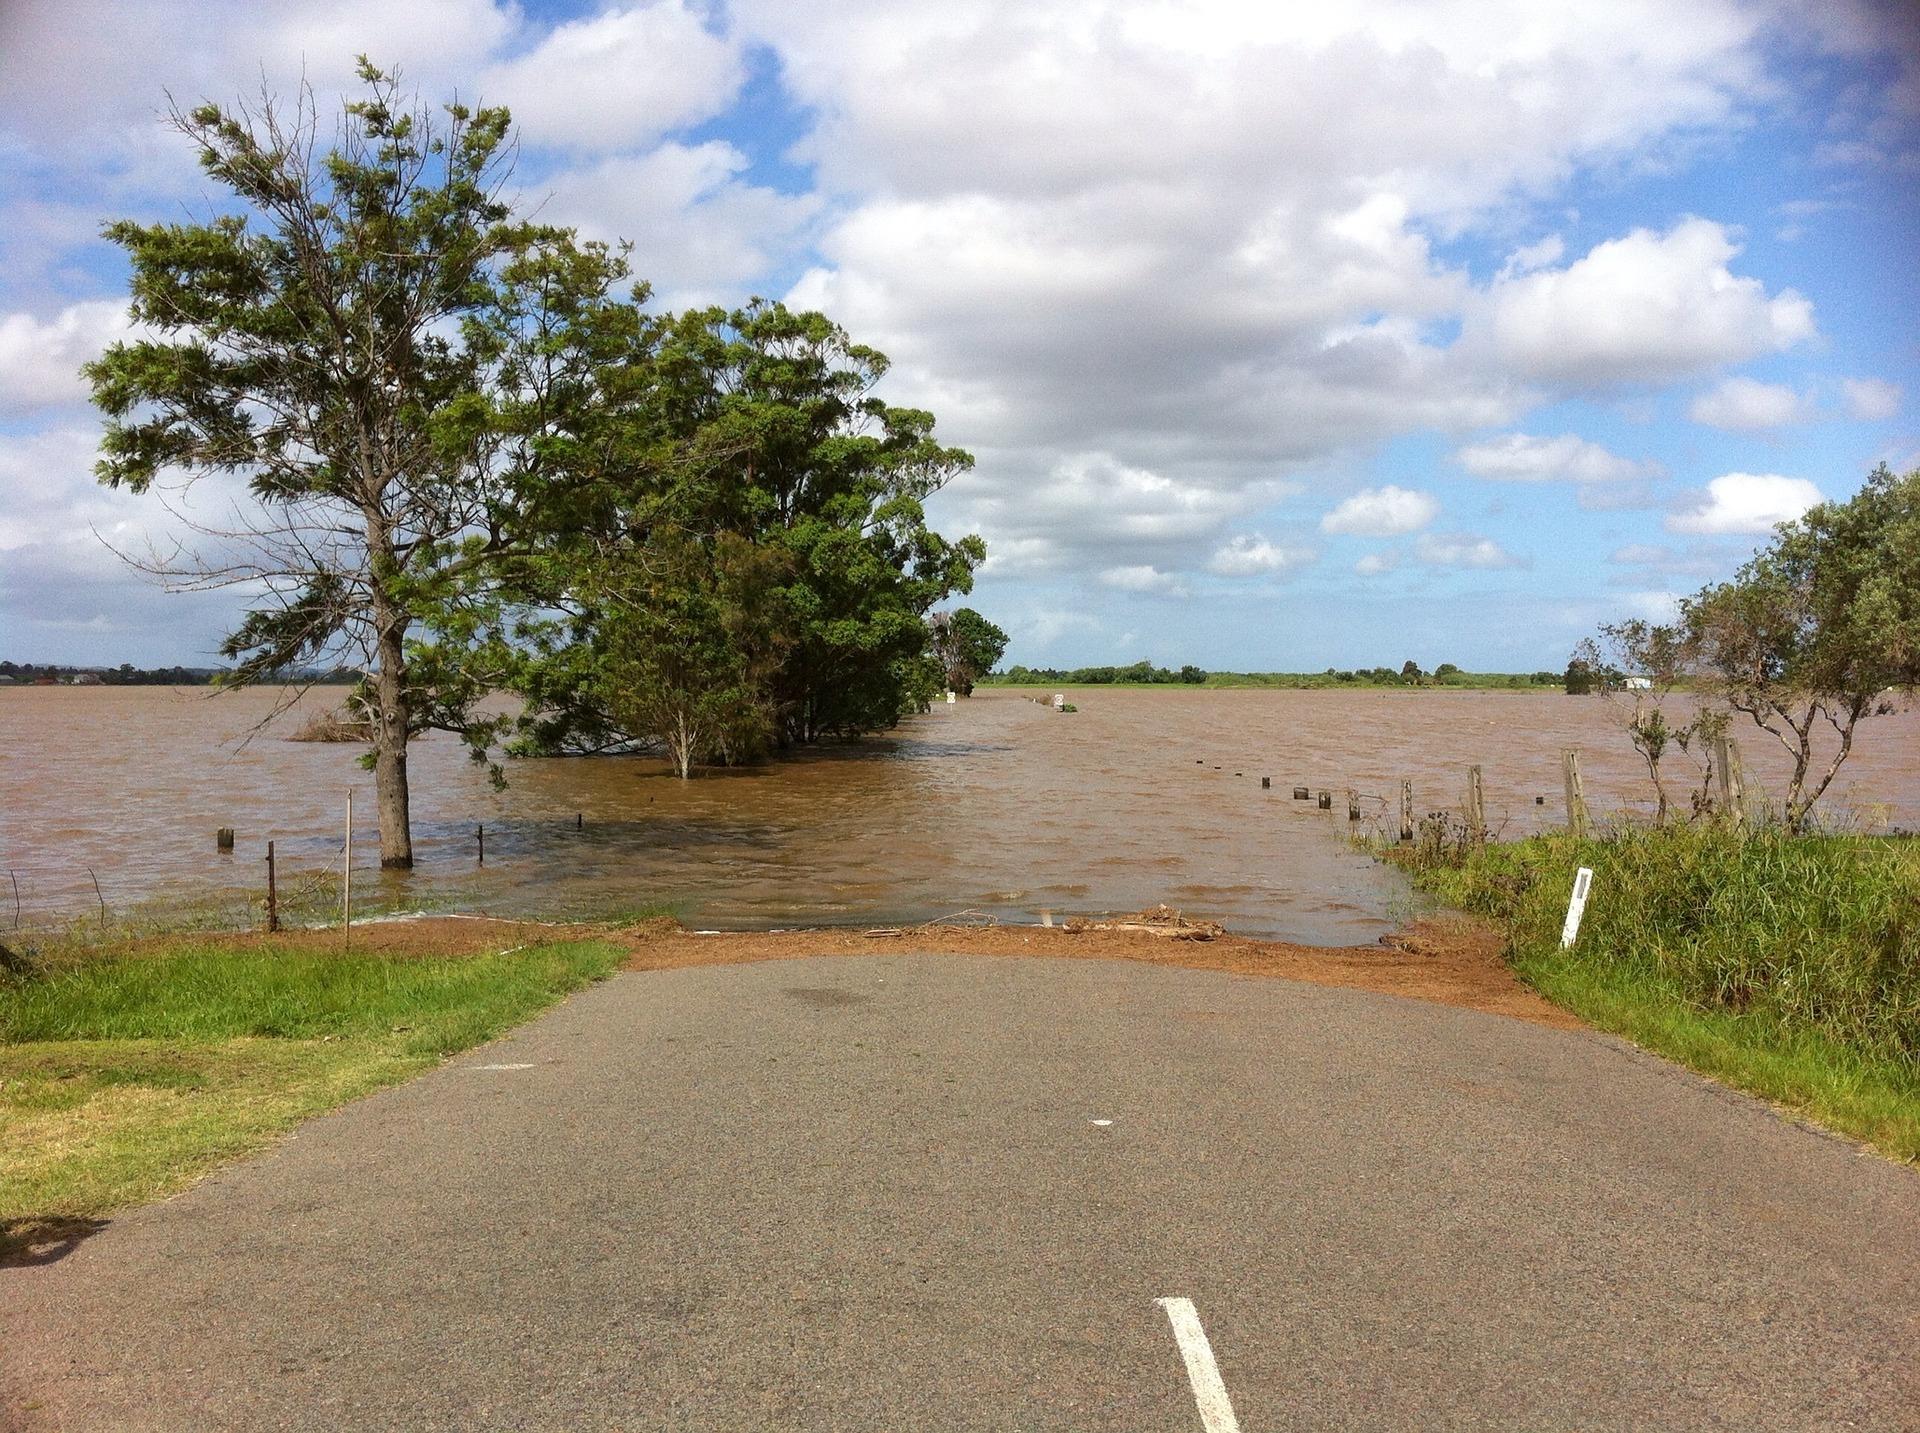 road cut off by flood waters - climate change